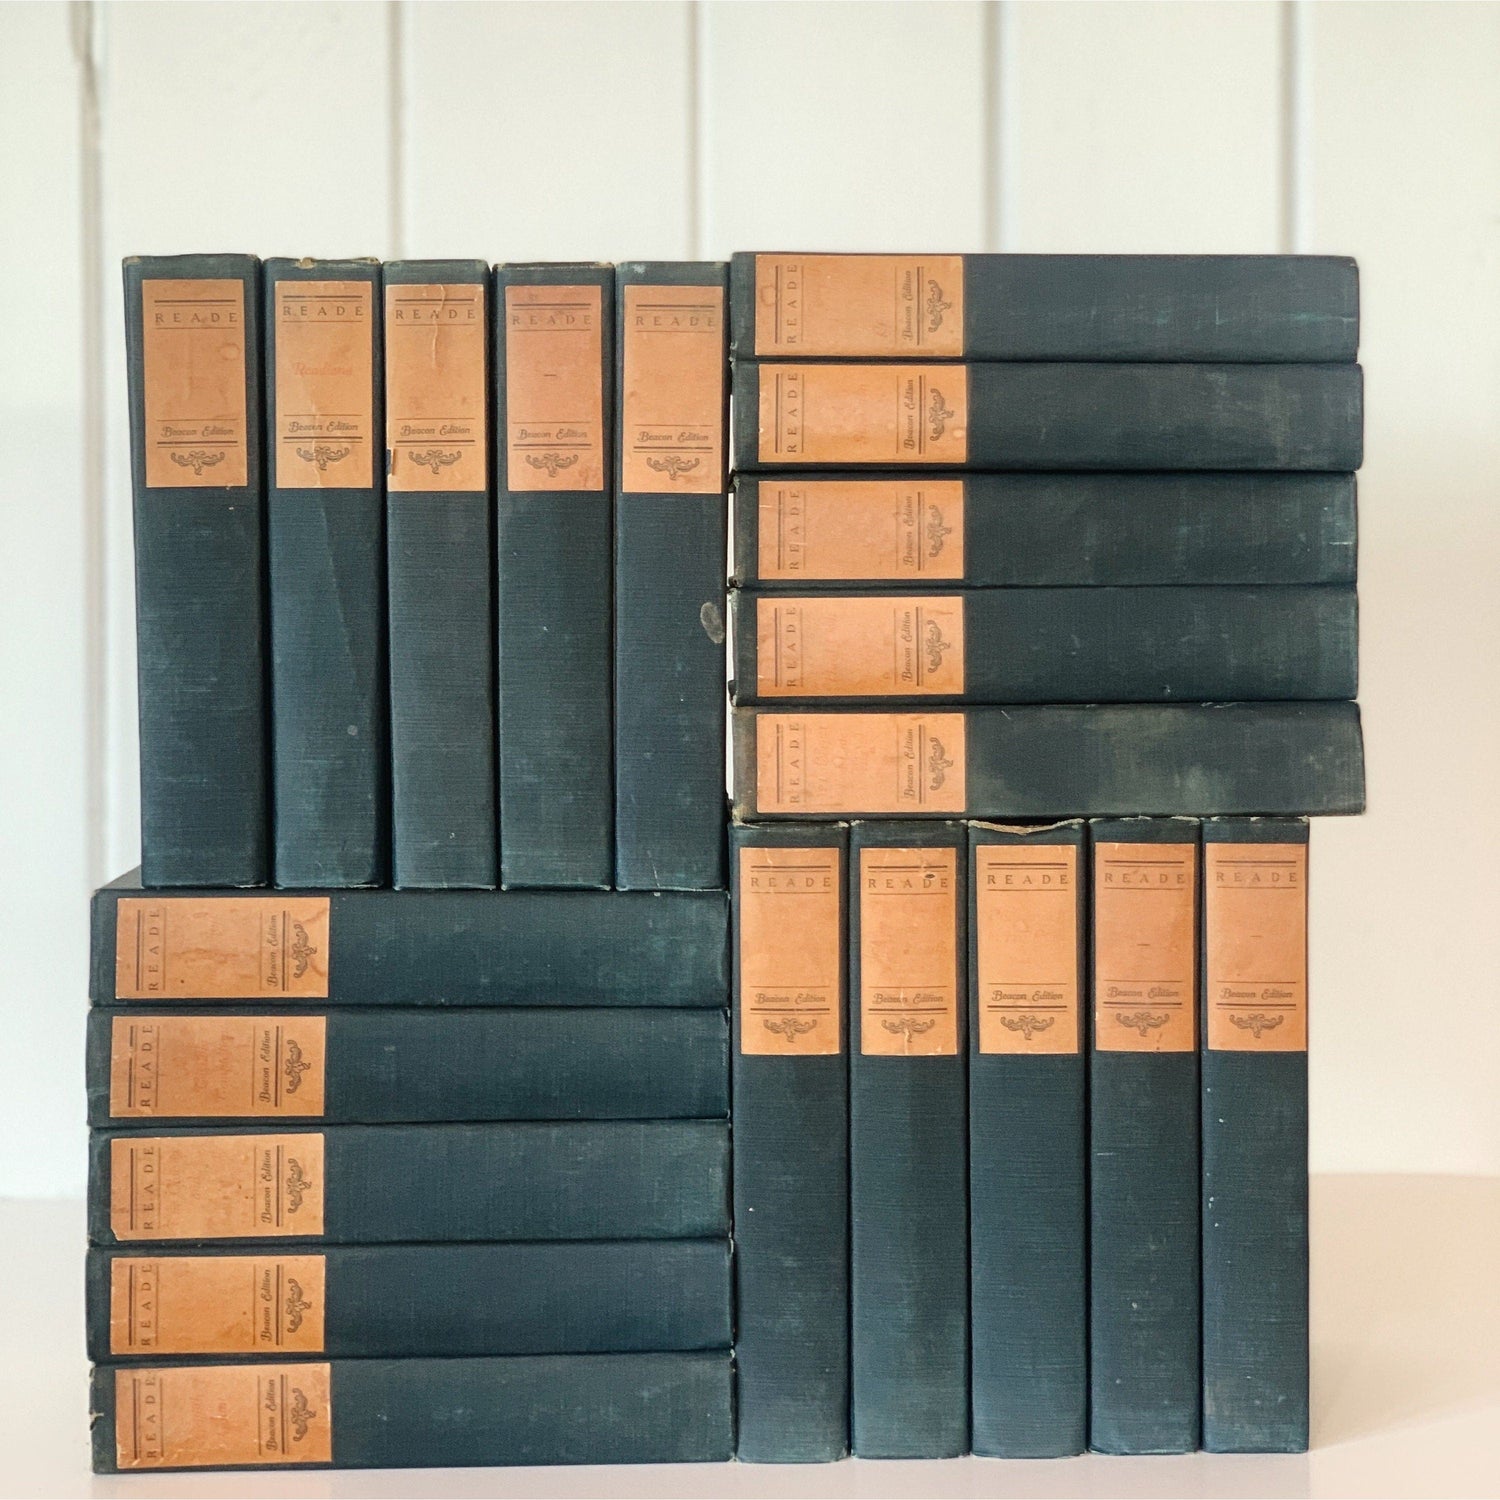 Antique Blue Book Set, Charles Reade, Large Dark Blue Complete Set of 20 Volumes, The Beacon Edition